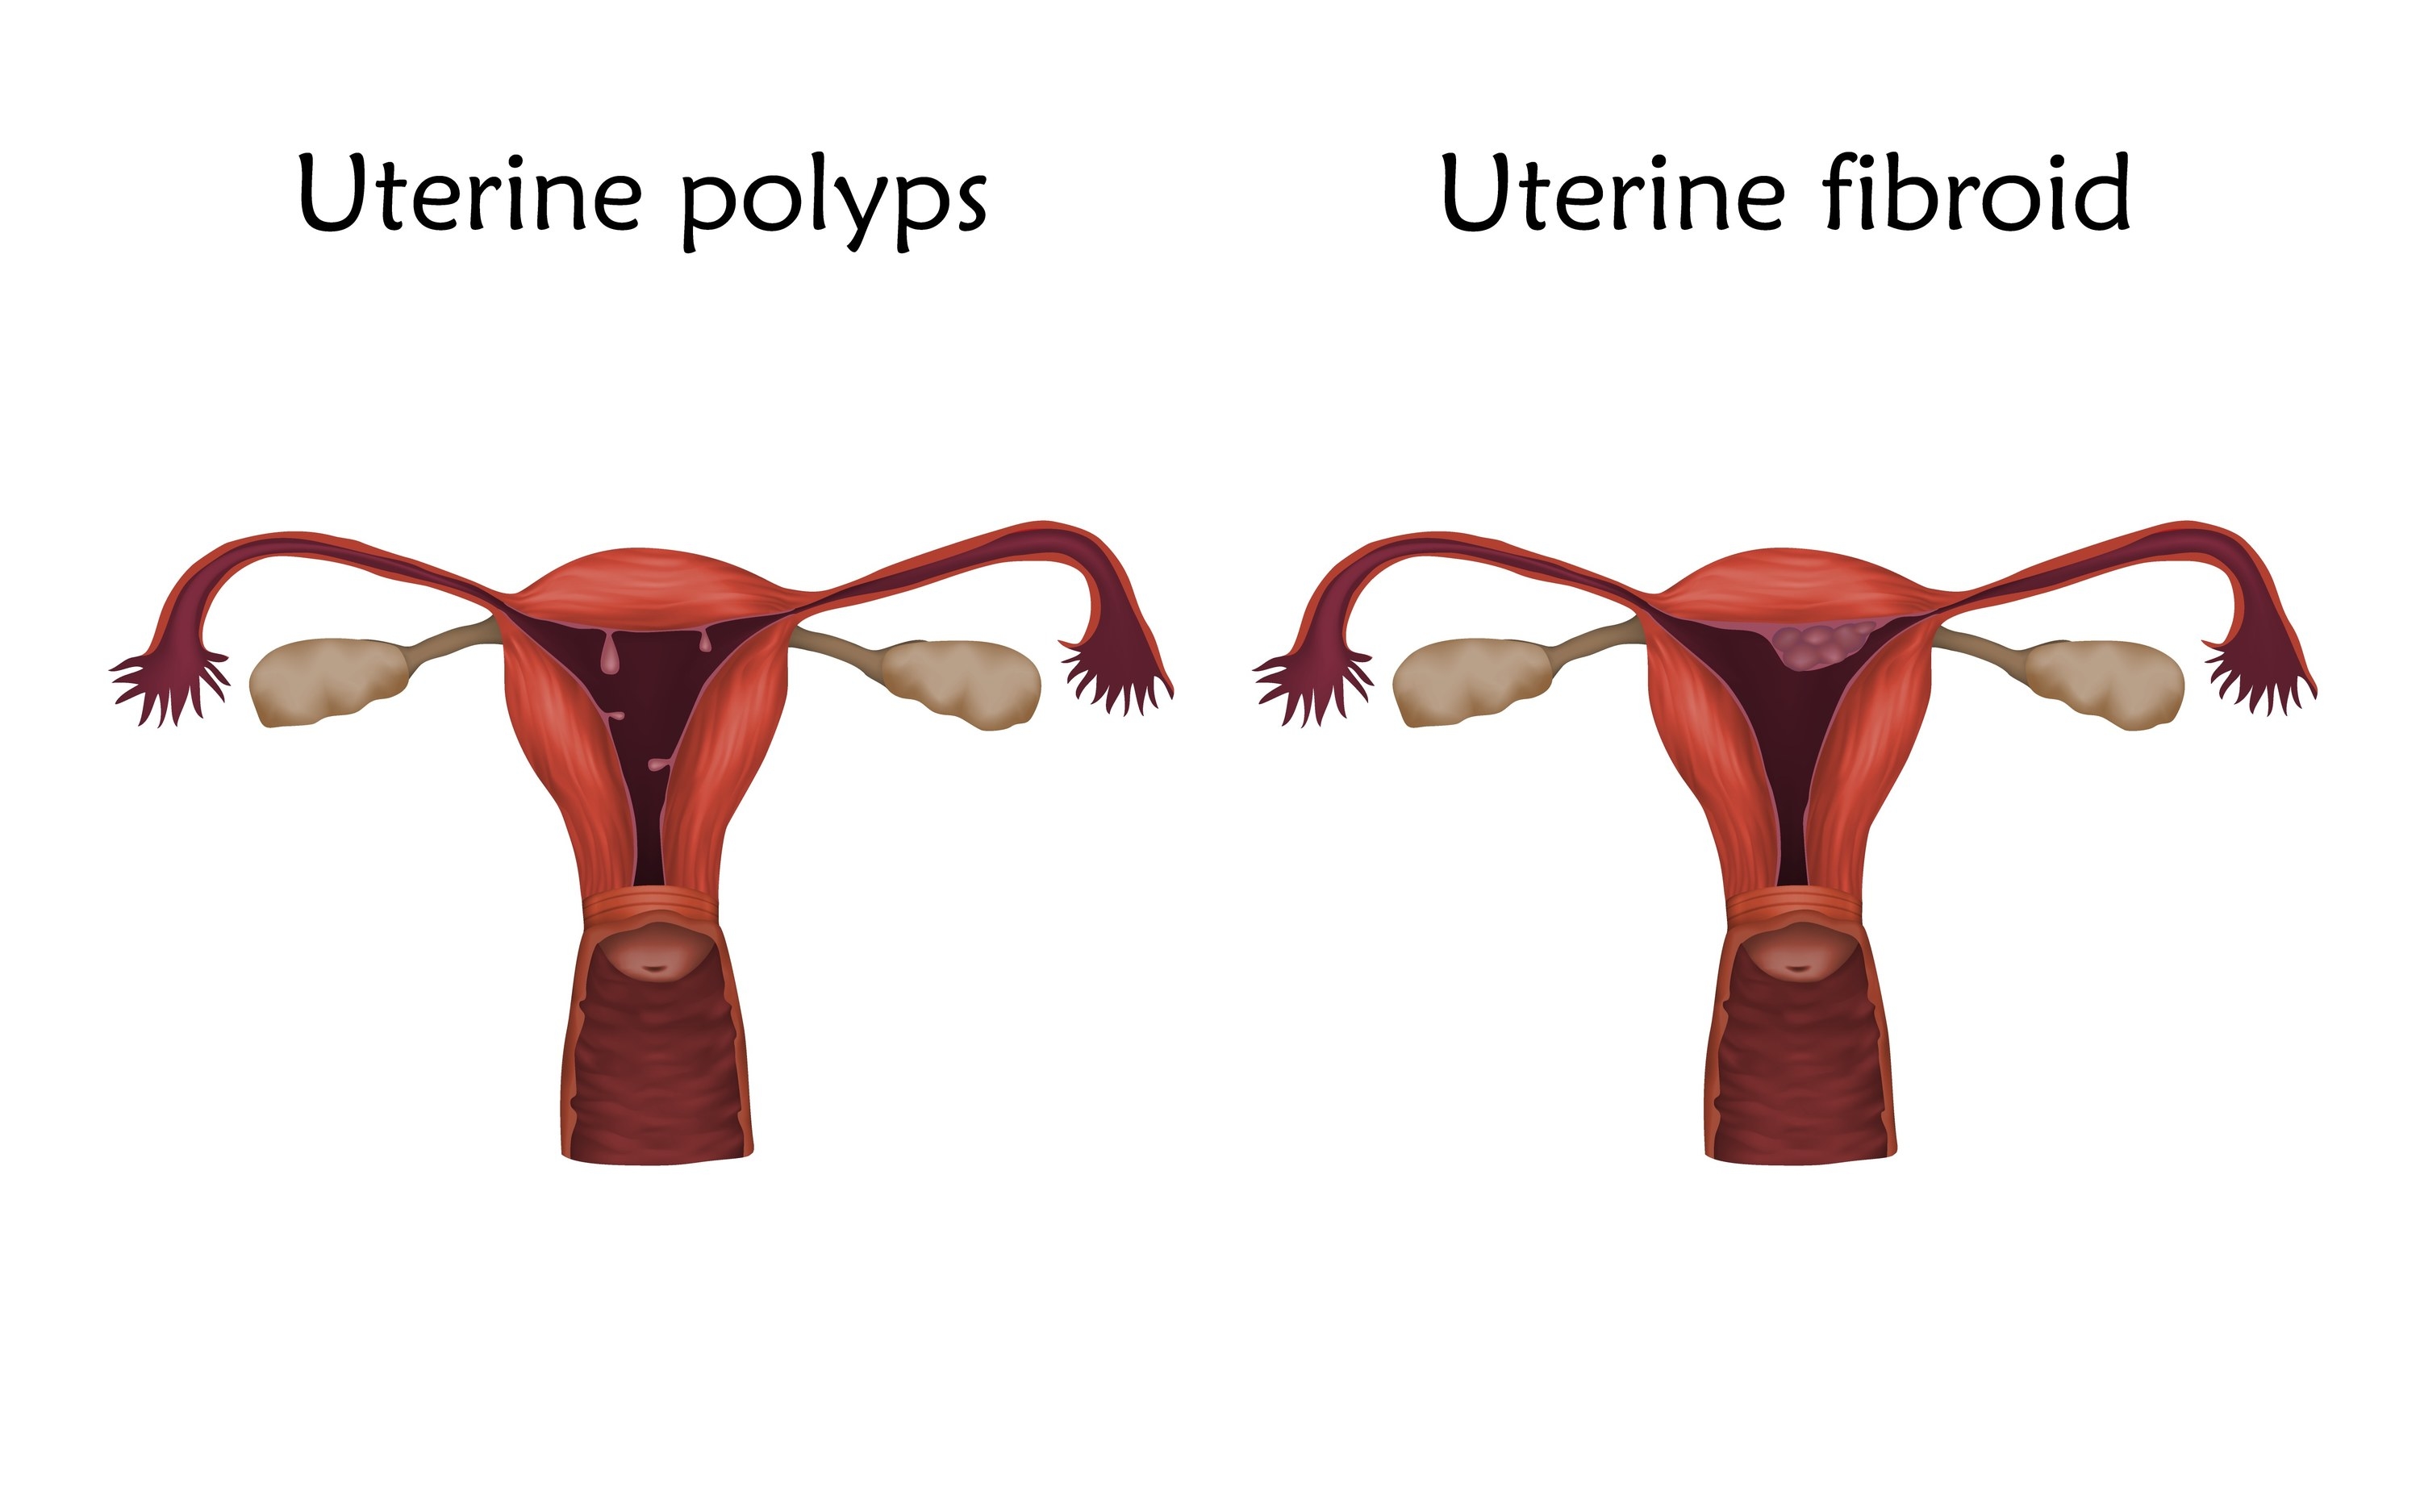 A drawn chart of a uterus with uterine polyps next to a uterus with fibroids